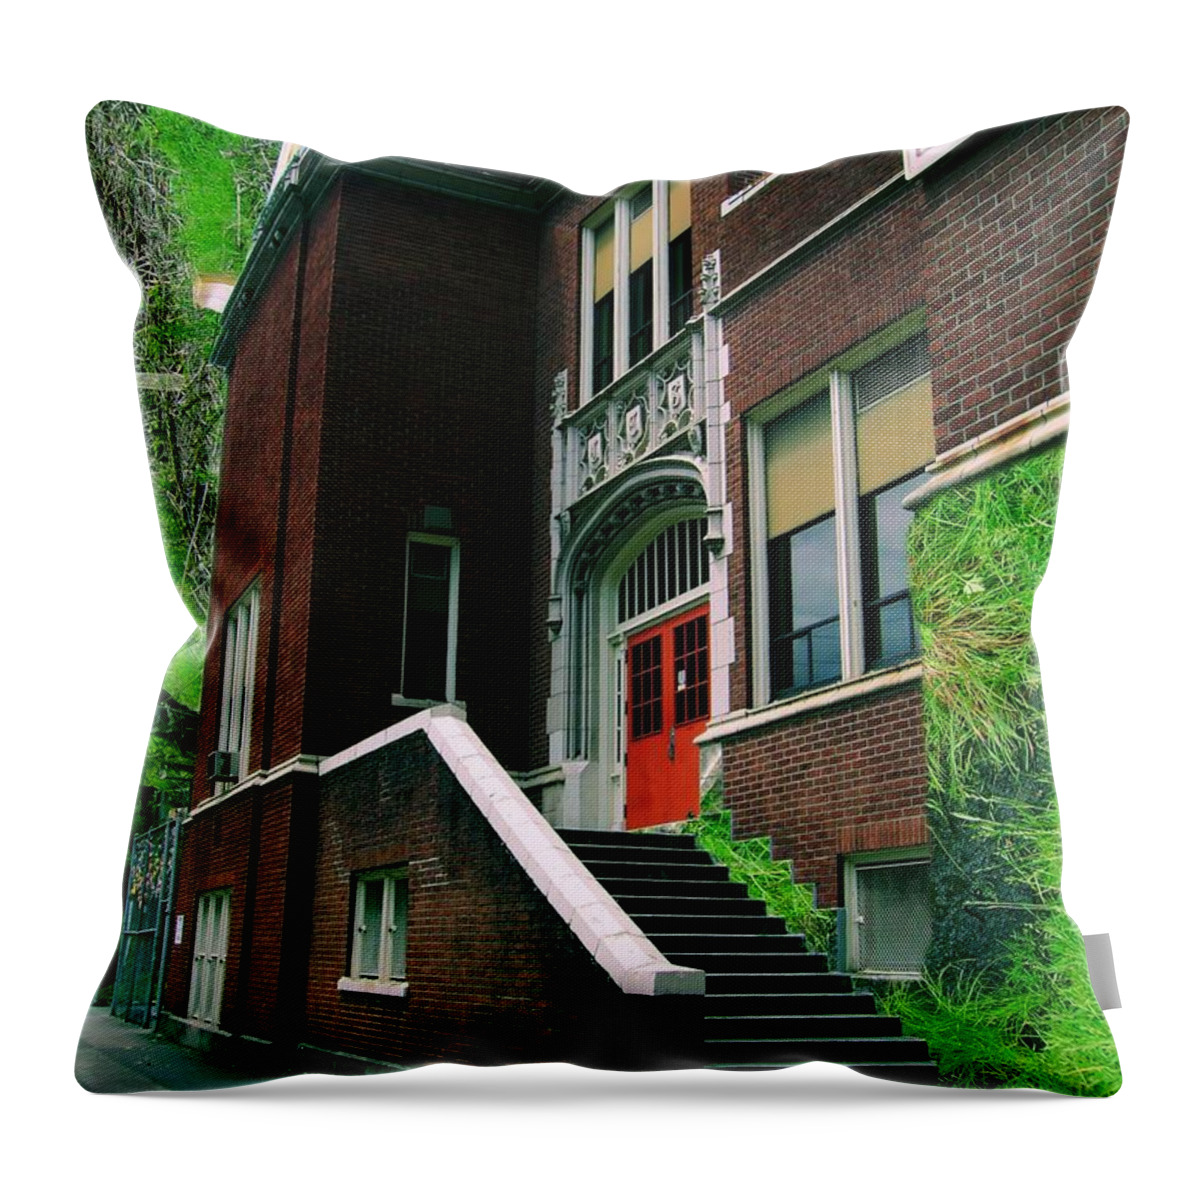 School Throw Pillow featuring the photograph Grassroots Education by Laureen Murtha Menzl